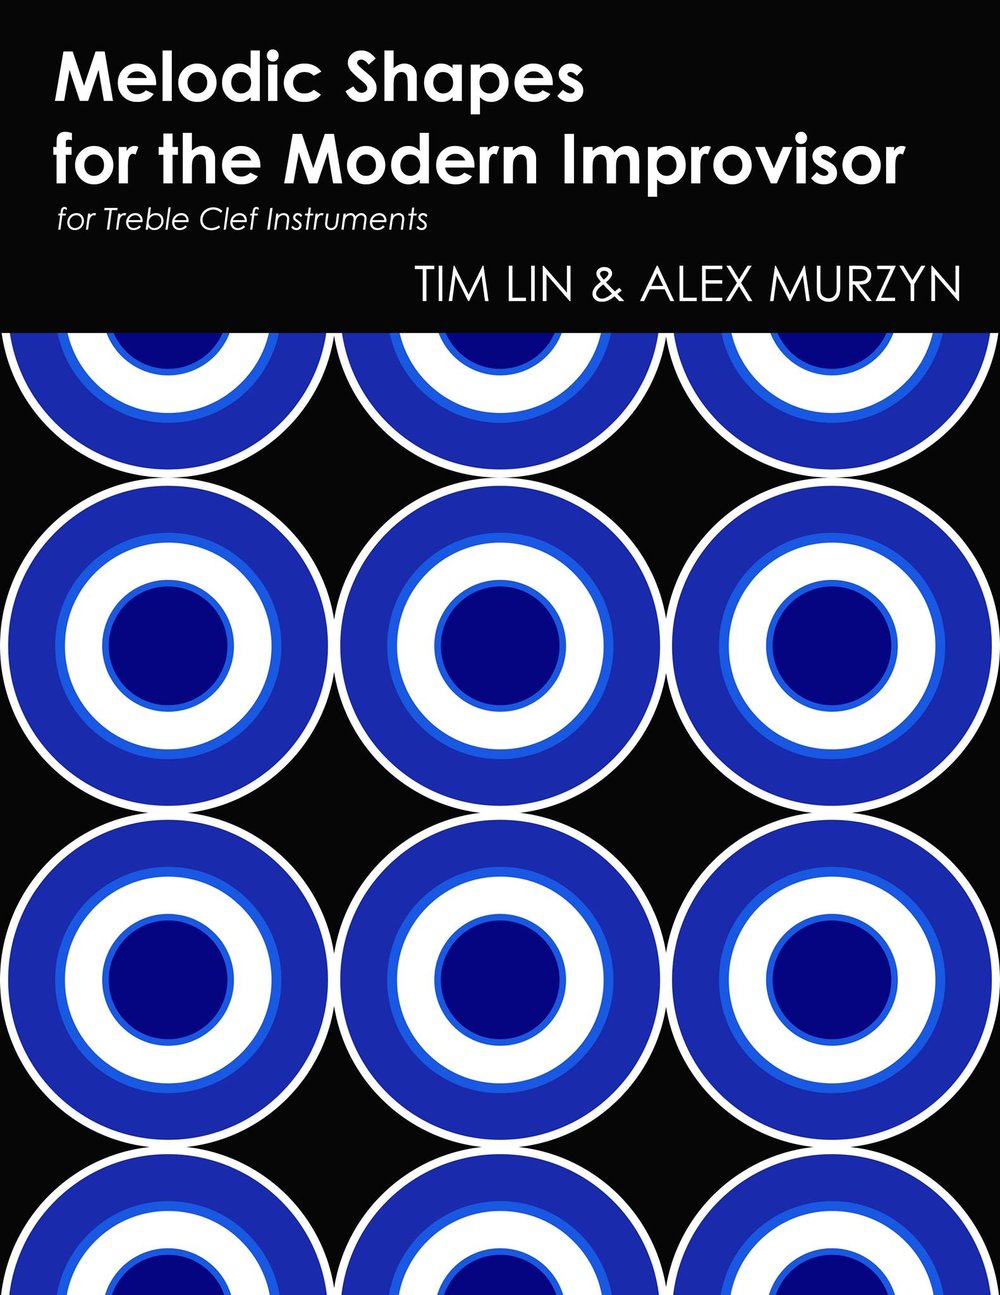 Melodic Shapes for the Modern Improvisor Tim Lin and Alex Murzyn